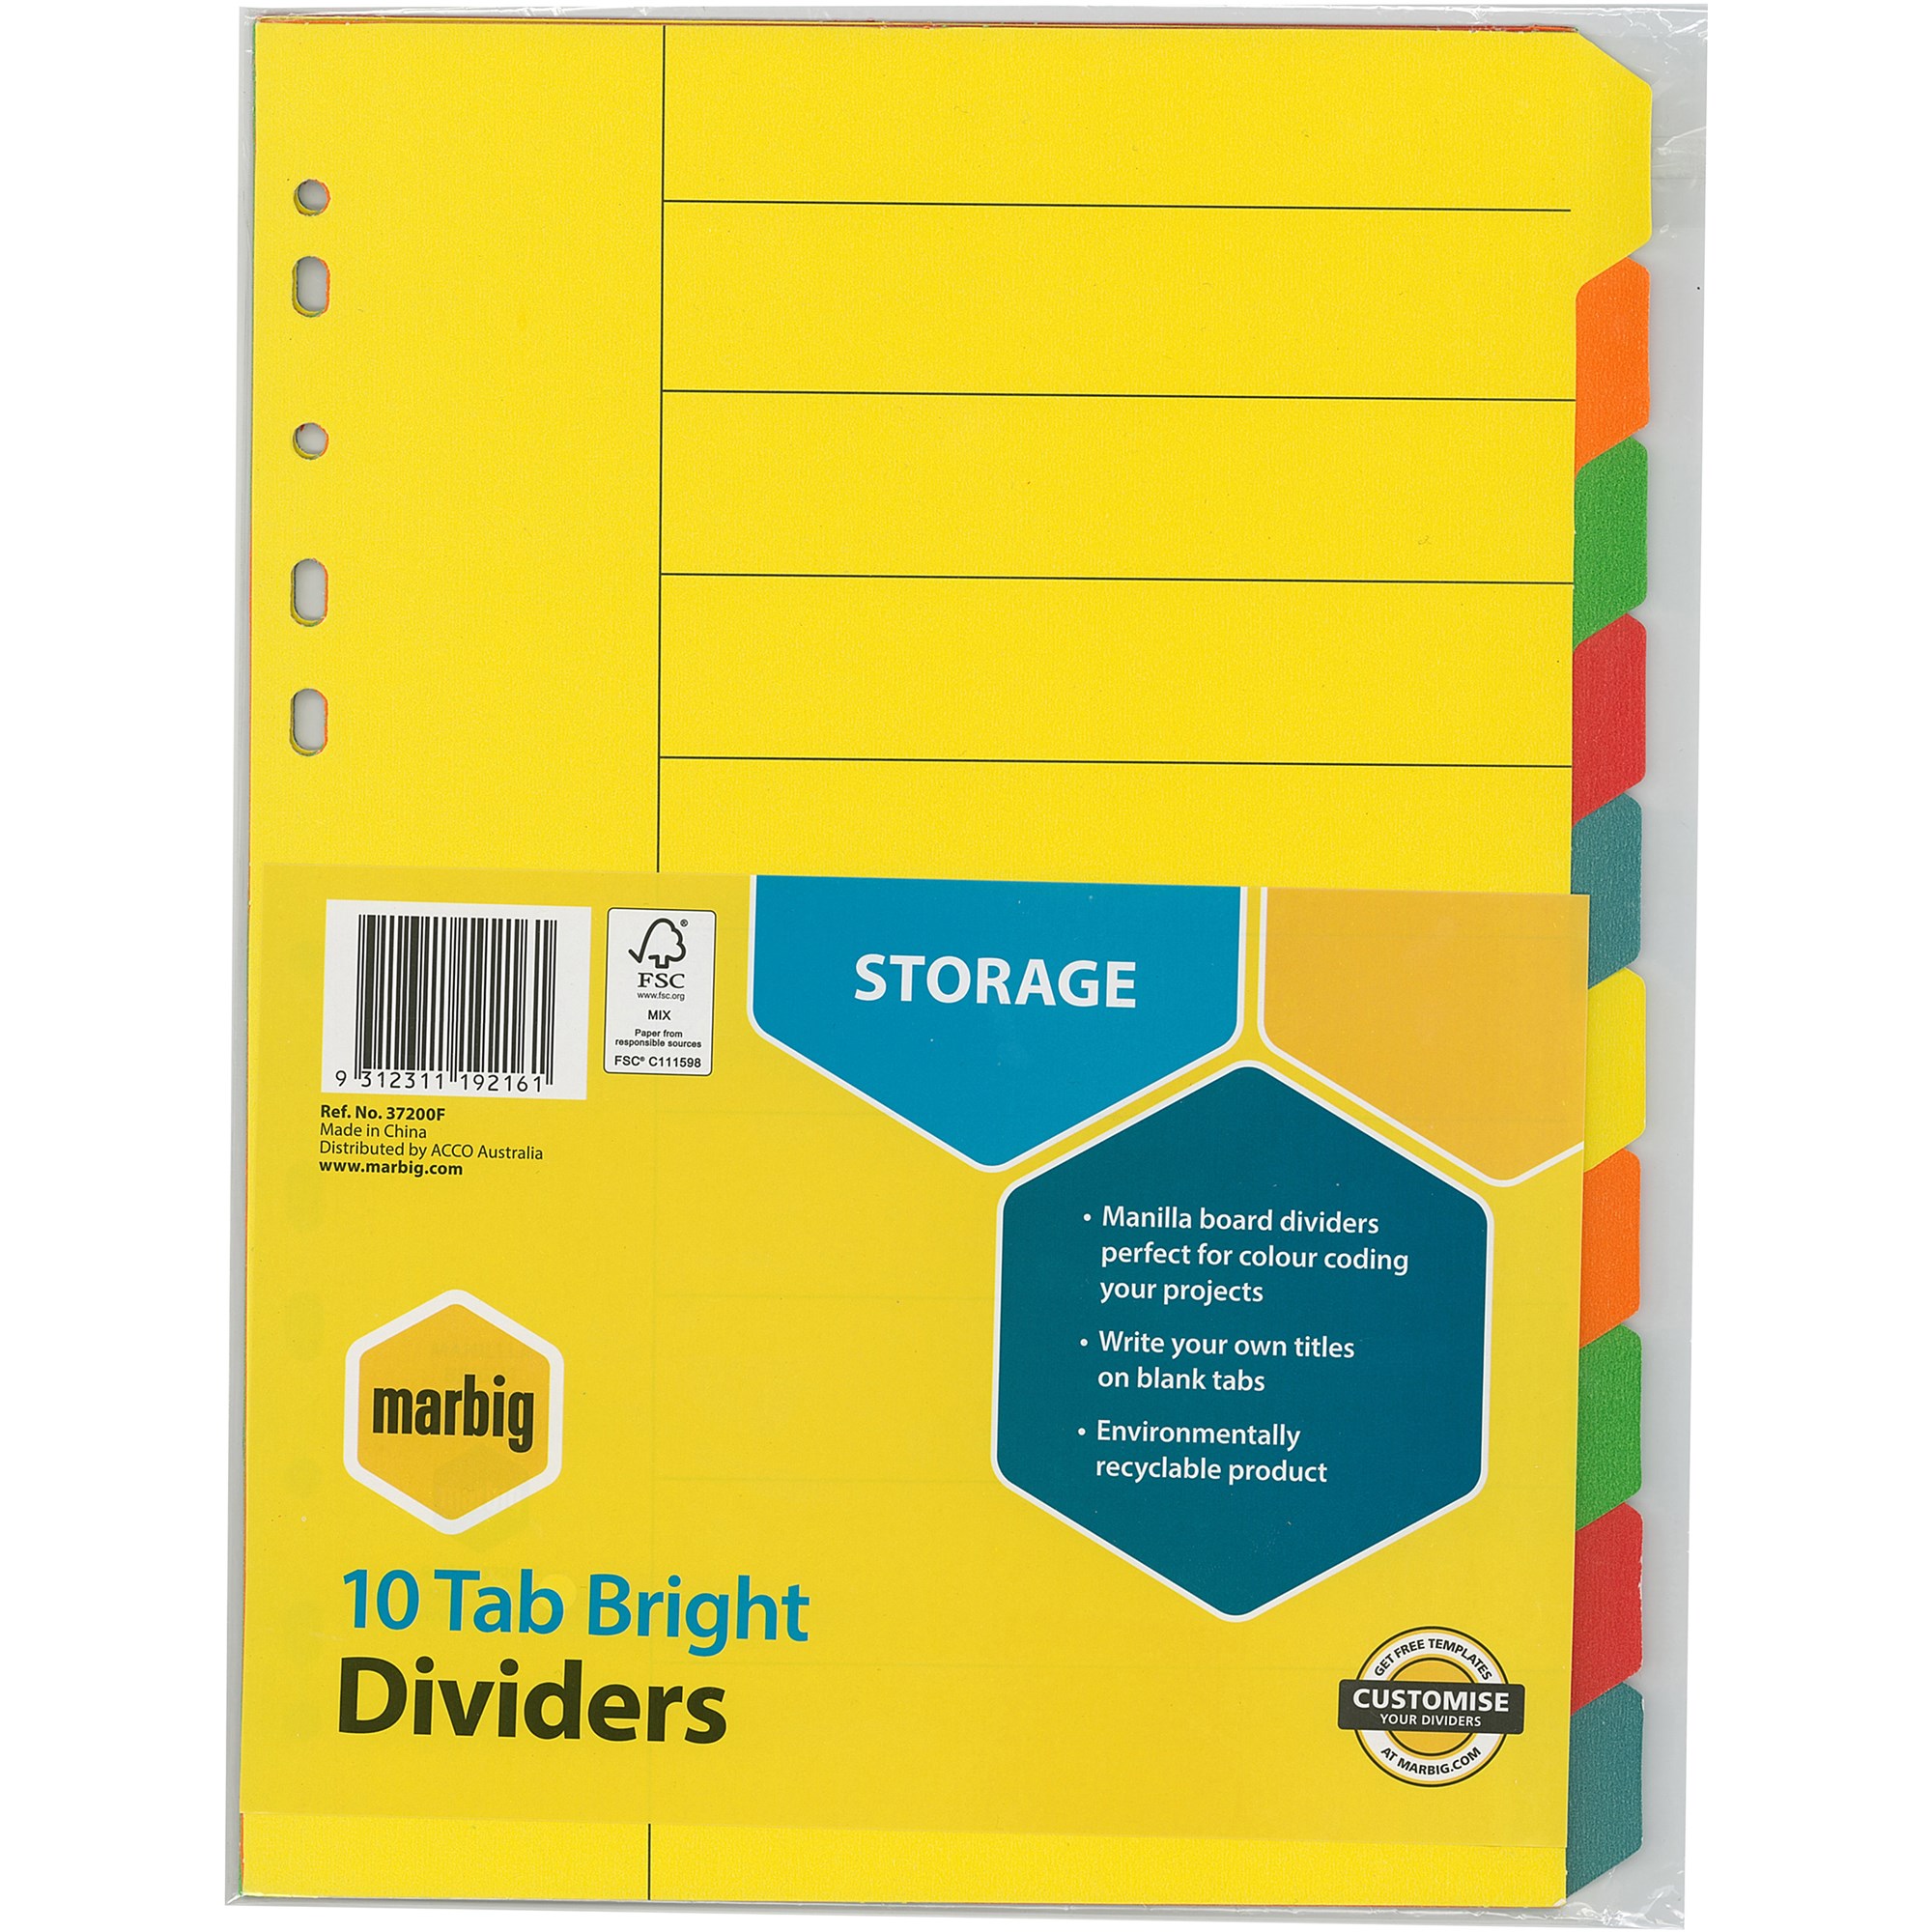 A4 Dividers